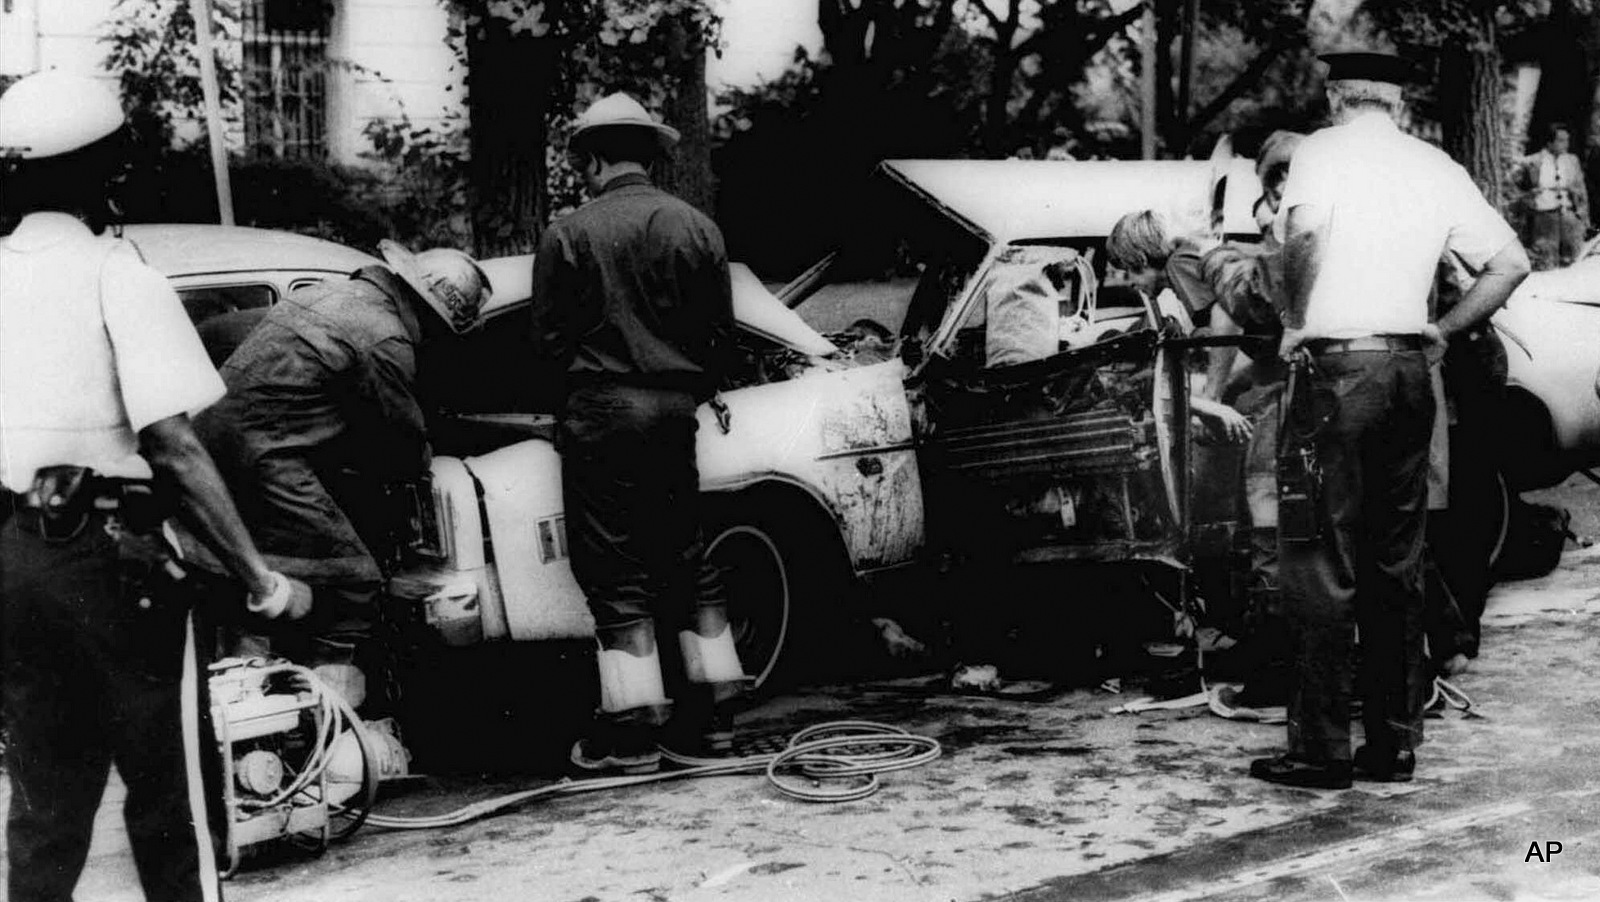 FILE - In this Sept. 21, 1976 black-and-white file photo, firemen remove victims from a car shattered by a bomb blast on Embassy Row in Washington. Orlando Letelier, former Chilean ambassador to the U.S., and Ronne Karpen Moffitt, his aide, were both killed in the blast. As secretary of state, Henry Kissinger canceled a U.S. warning against carrying out international political assassinations that was to have gone to Chile and two neighboring nations just days before a former ambassador was killed by Chilean agents on Washington's Embassy Row in 1976.